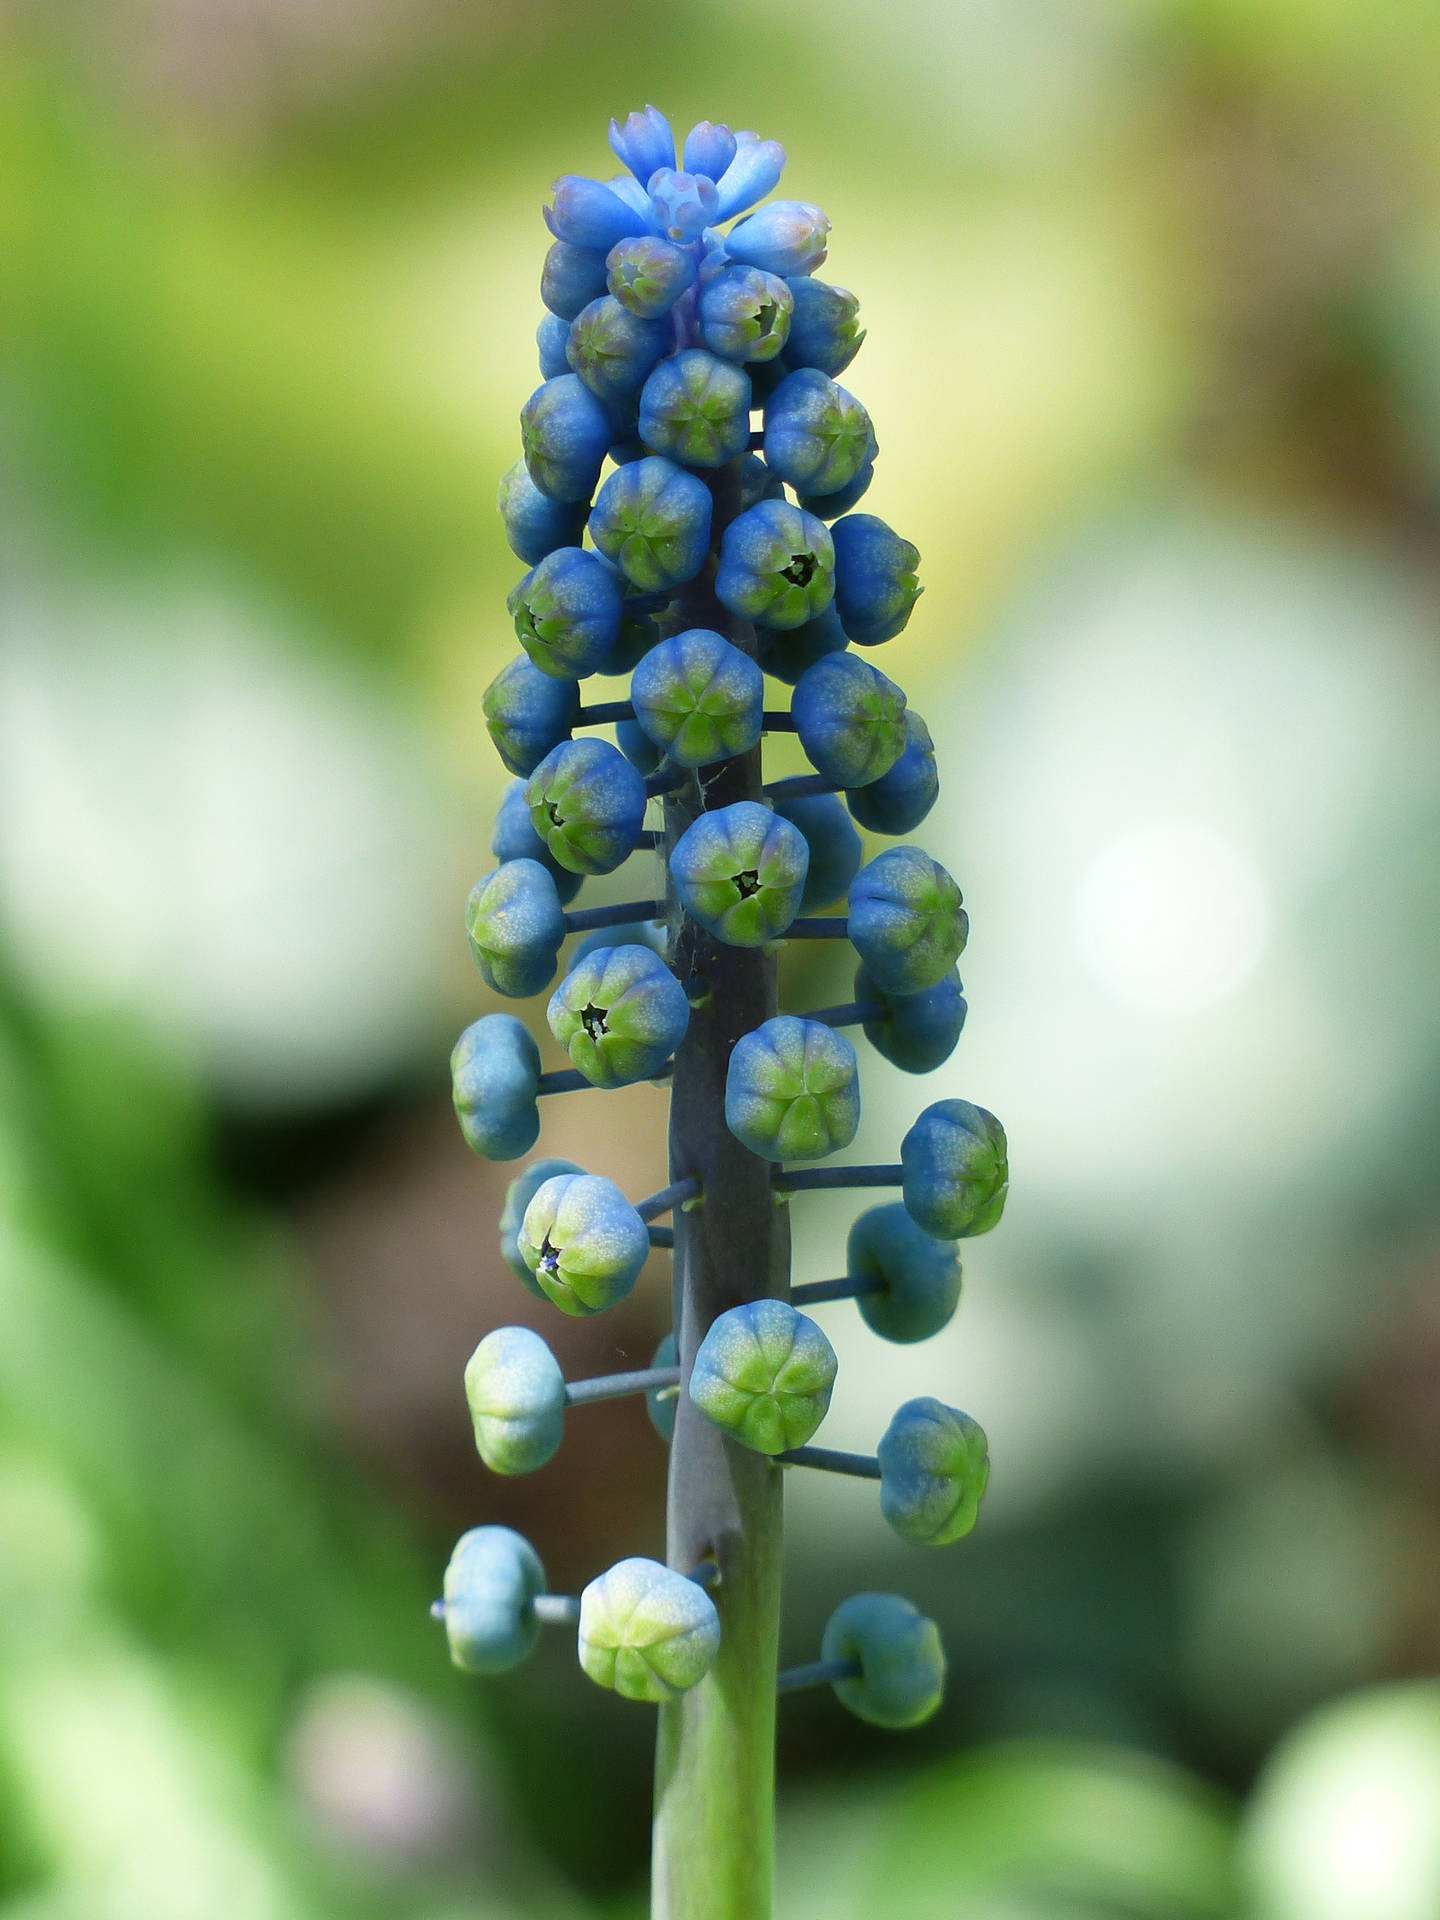 Unsprouted Hyacinth Buds Wallpaper